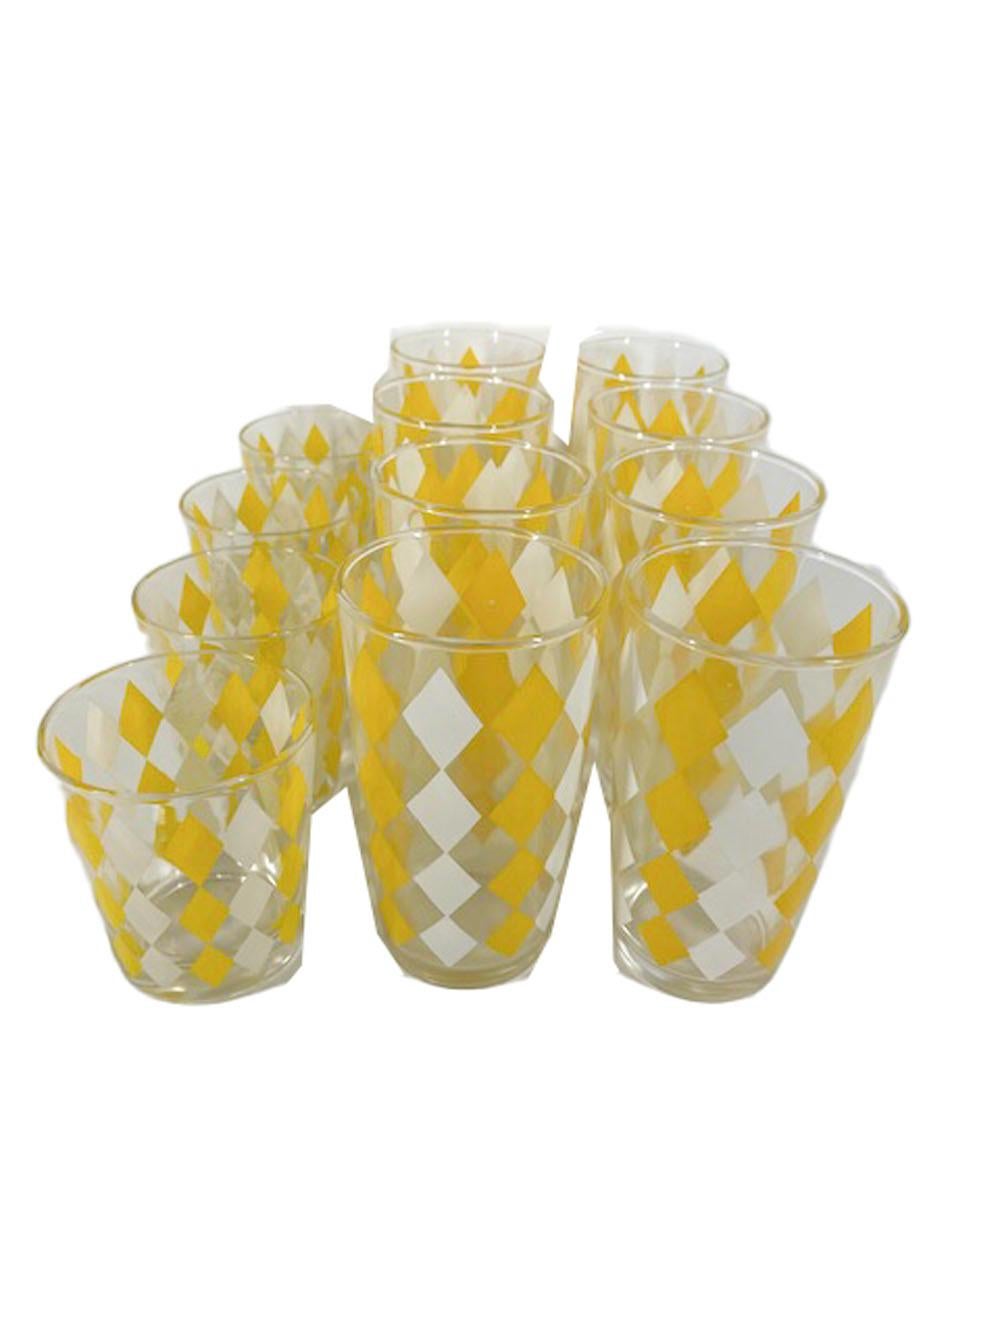 Mid-Century Modern Vintage Yellow and White Diamonds Cocktail Shaker, Ice Bowl and Glasses Set